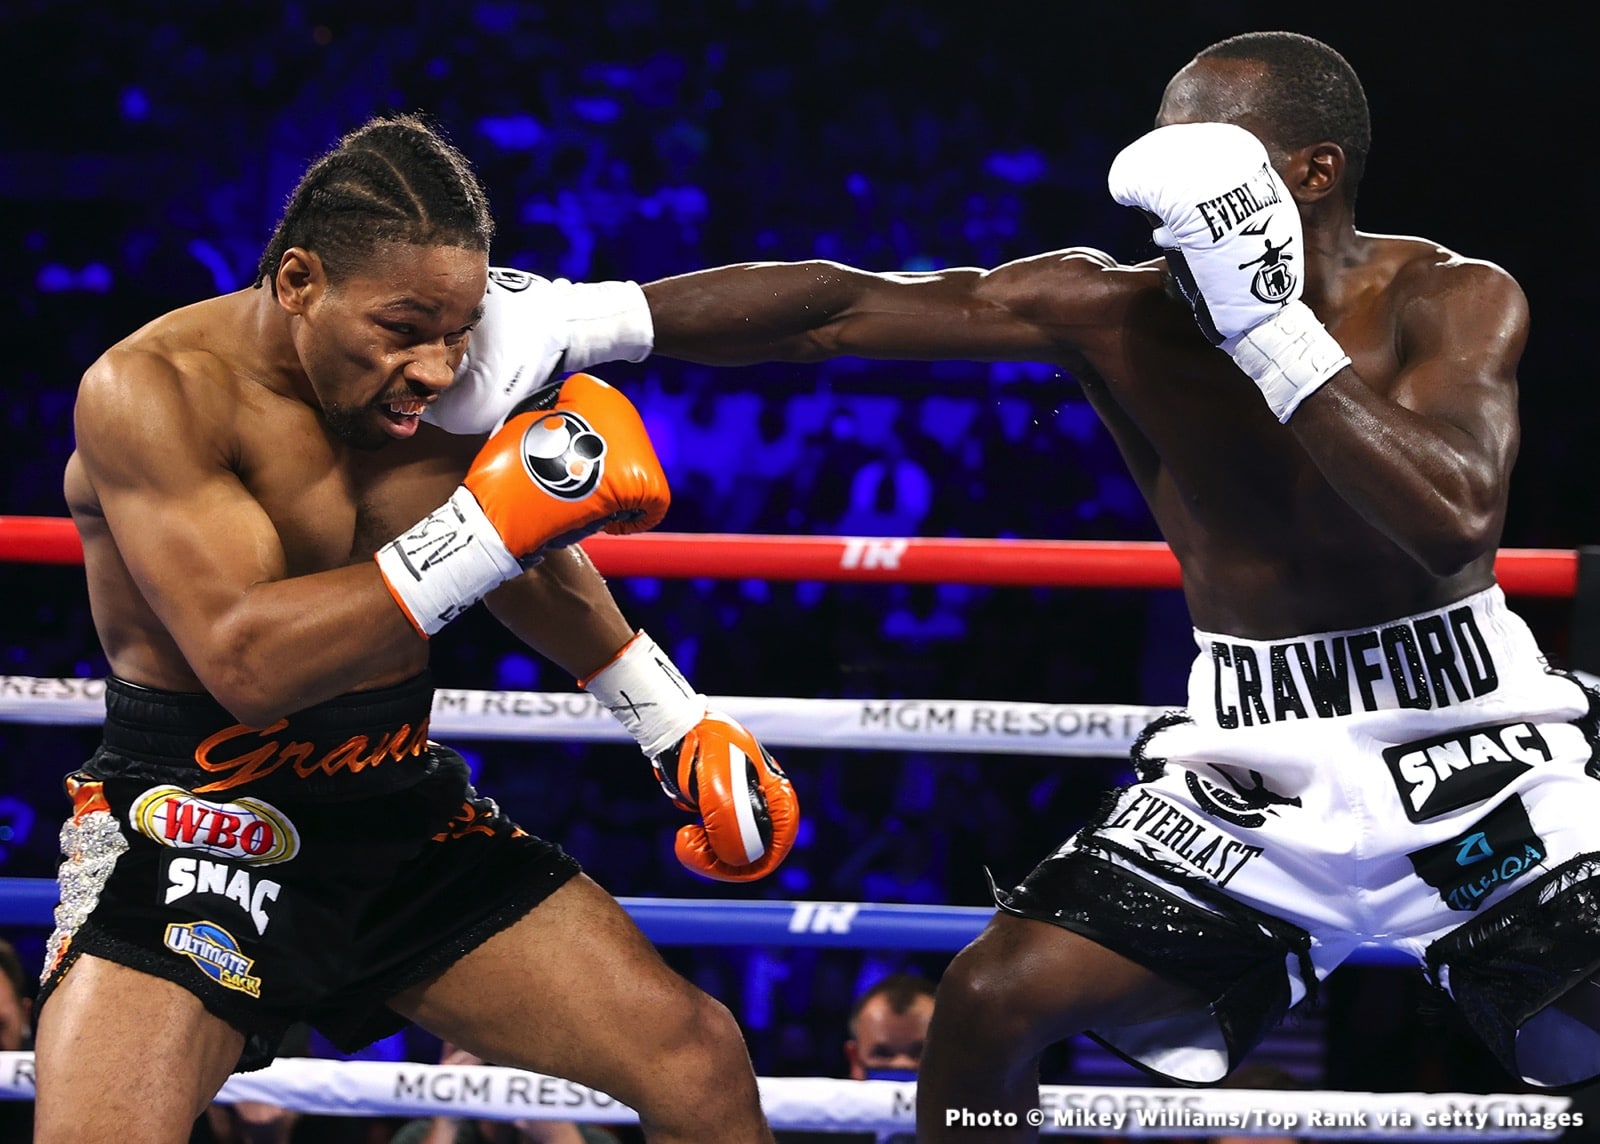 Terence Crawford boxing photo and news image